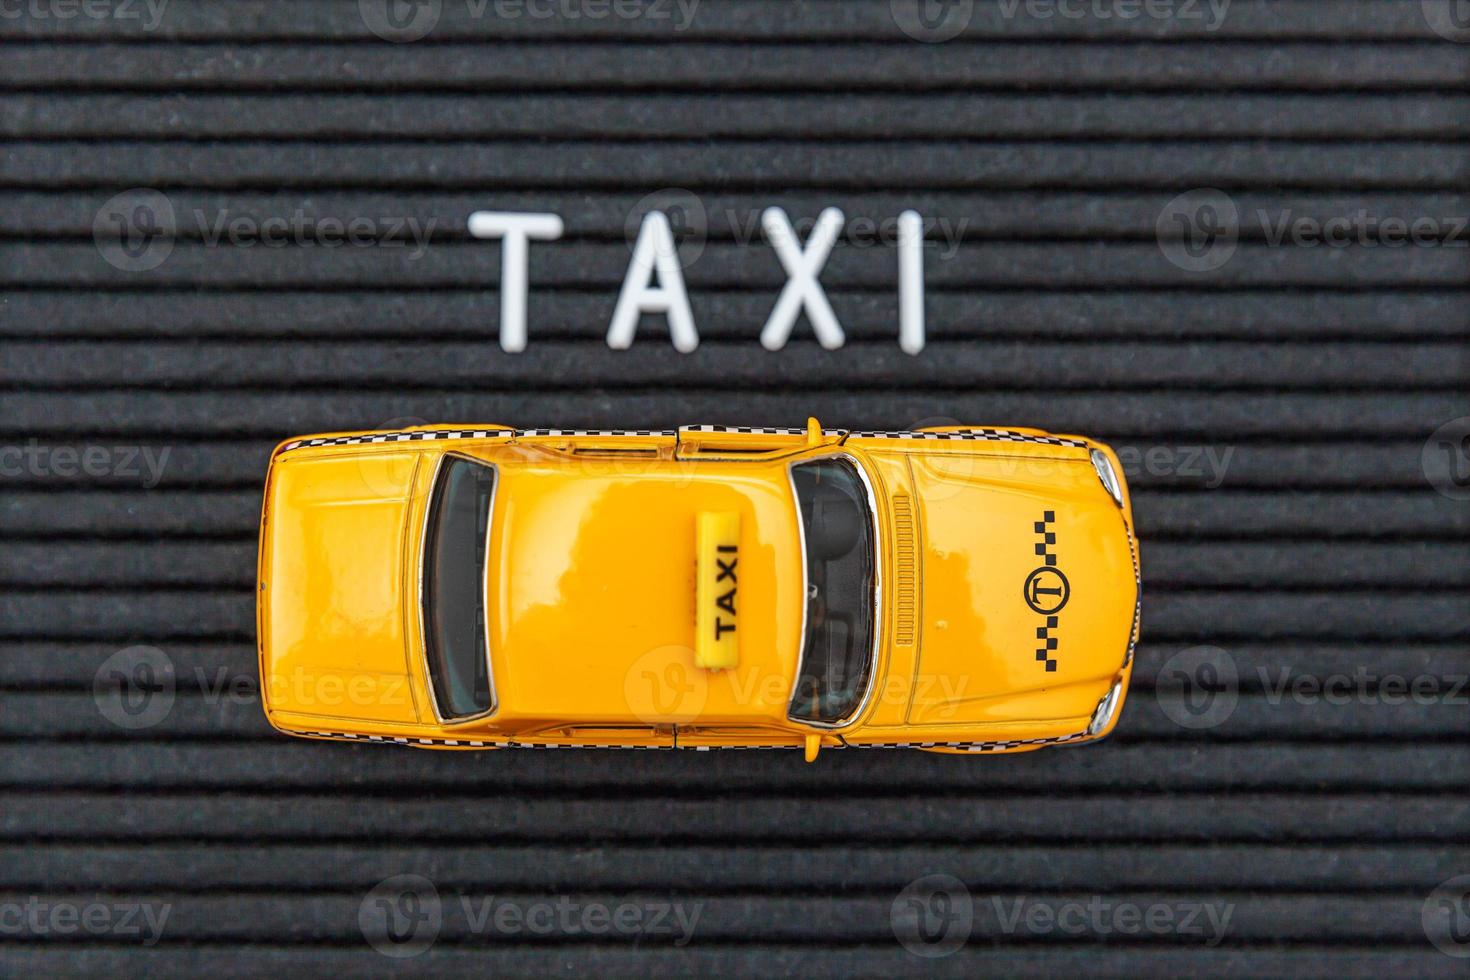 Simply design yellow toy car Taxi Cab model with inscription TAXI letters word on black background. Automobile and transportation symbol. City traffic delivery urban service idea concept. Copy space. photo